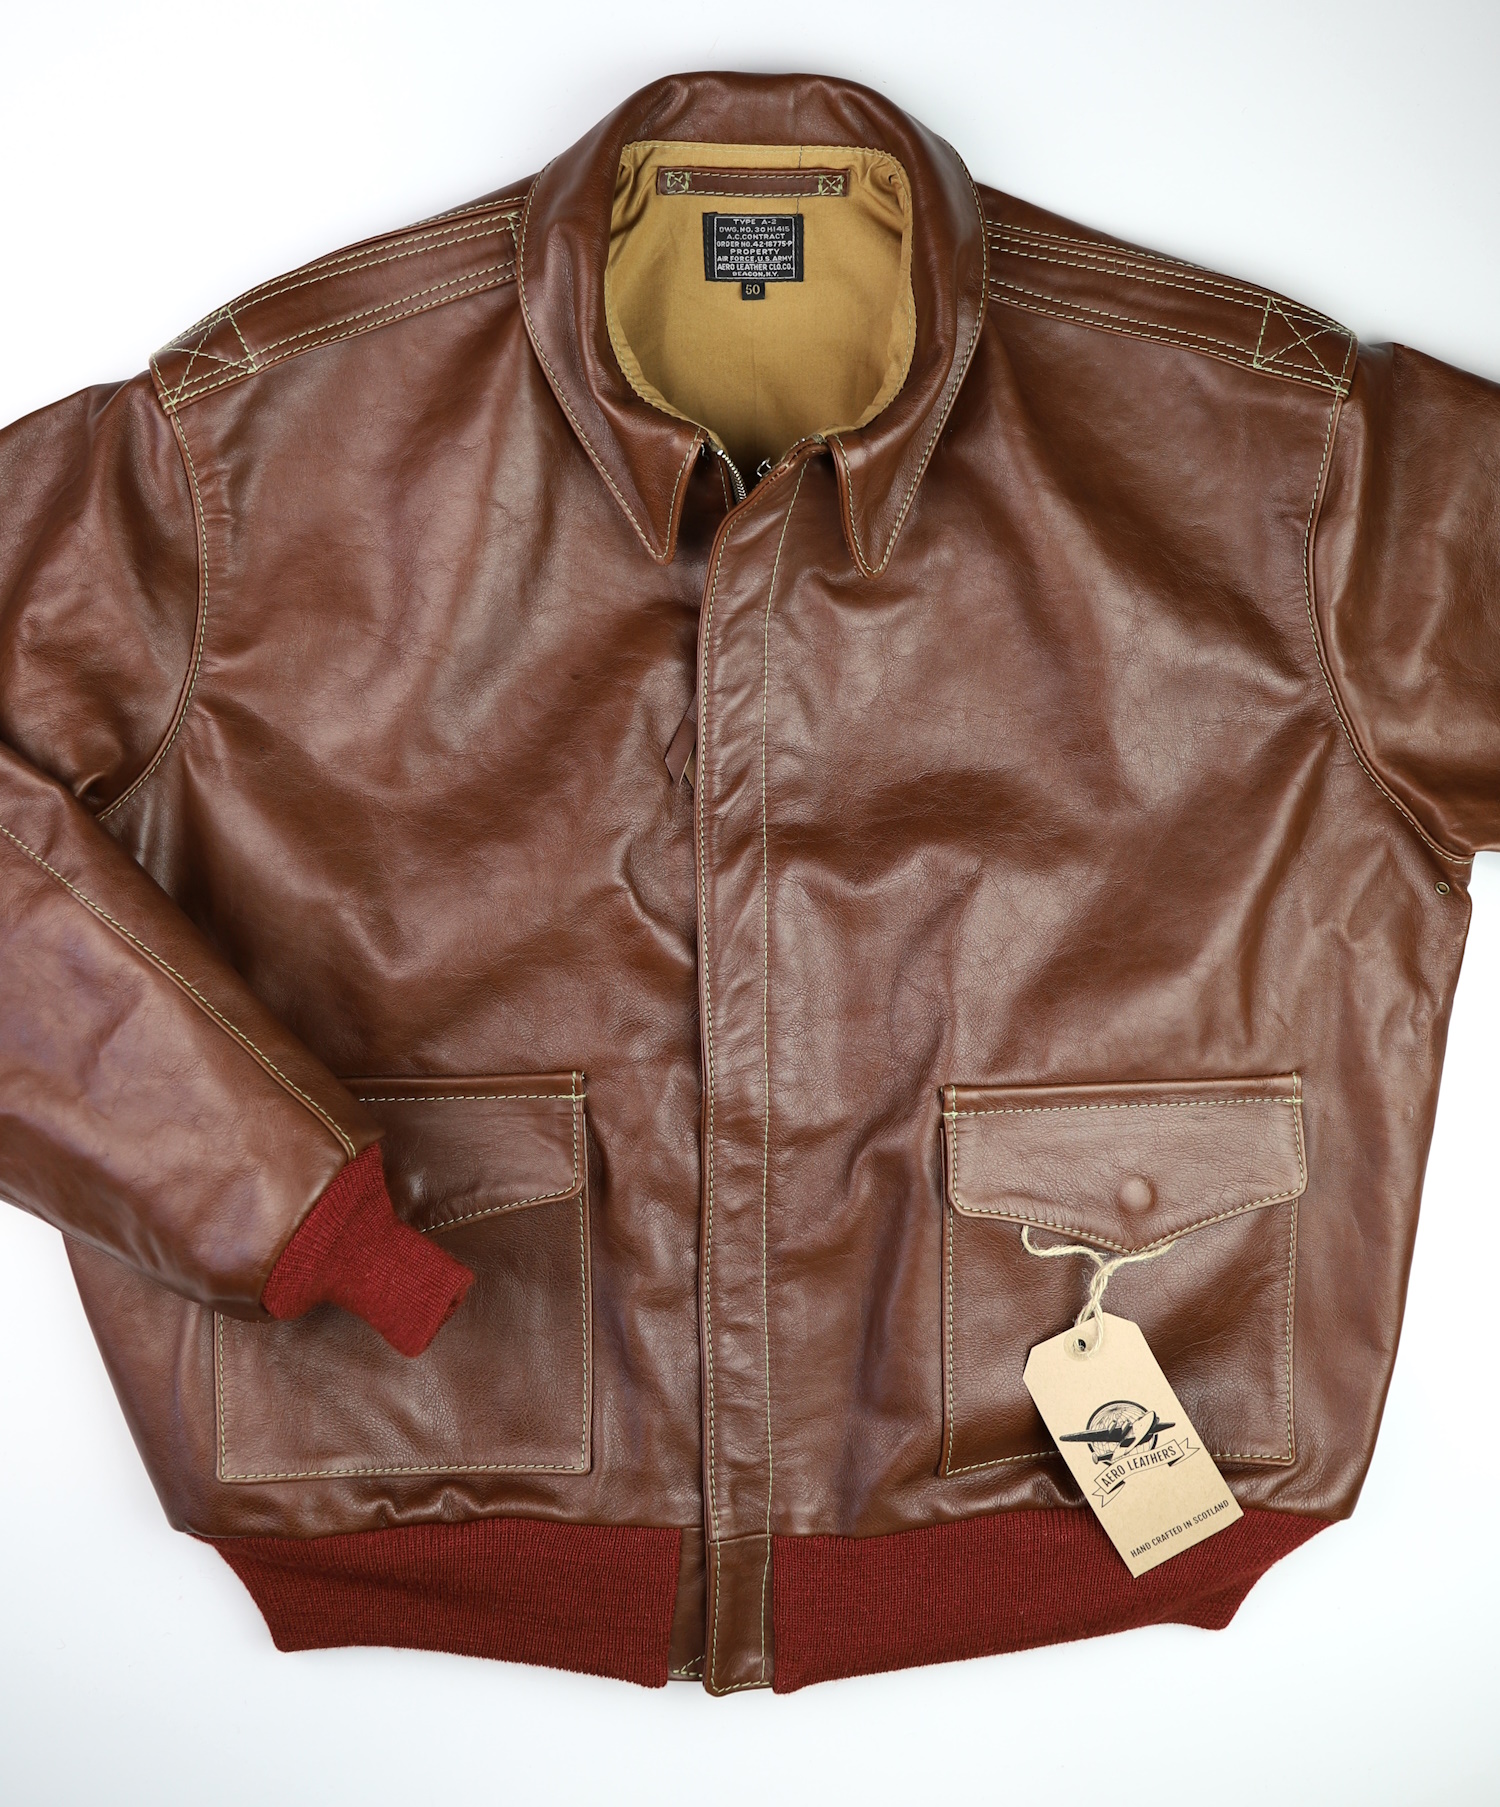 Aero A-2 18775 Russet Vicenza Horsehide AY2 front.jpg